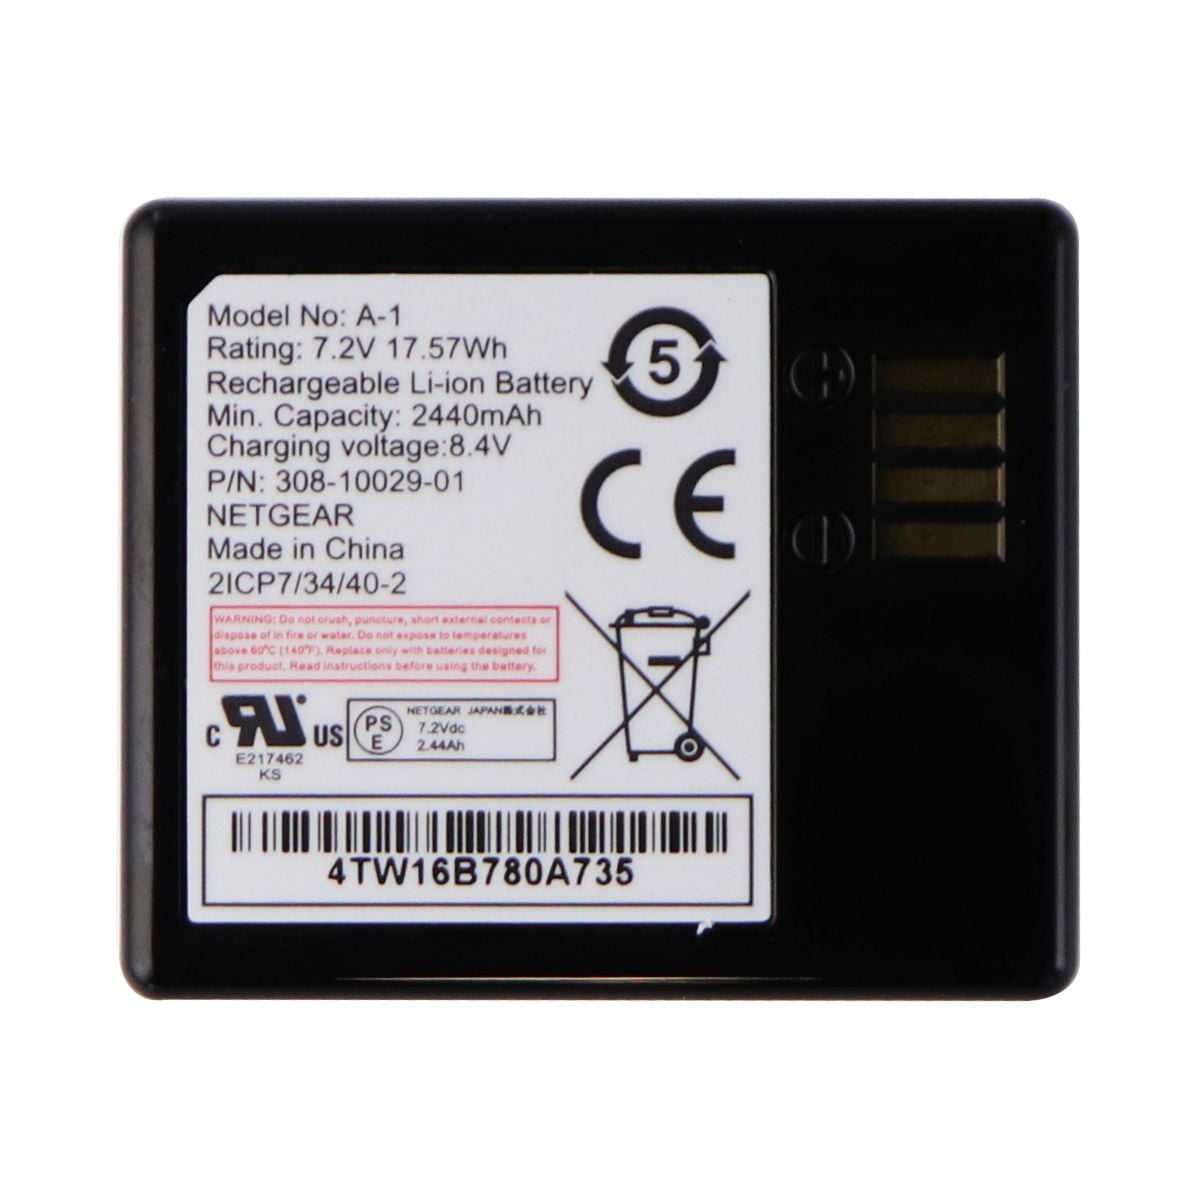 Official Arlo Rechargeable Battery for Arlo Pro & Pro 2 (A1) (Refurbished)